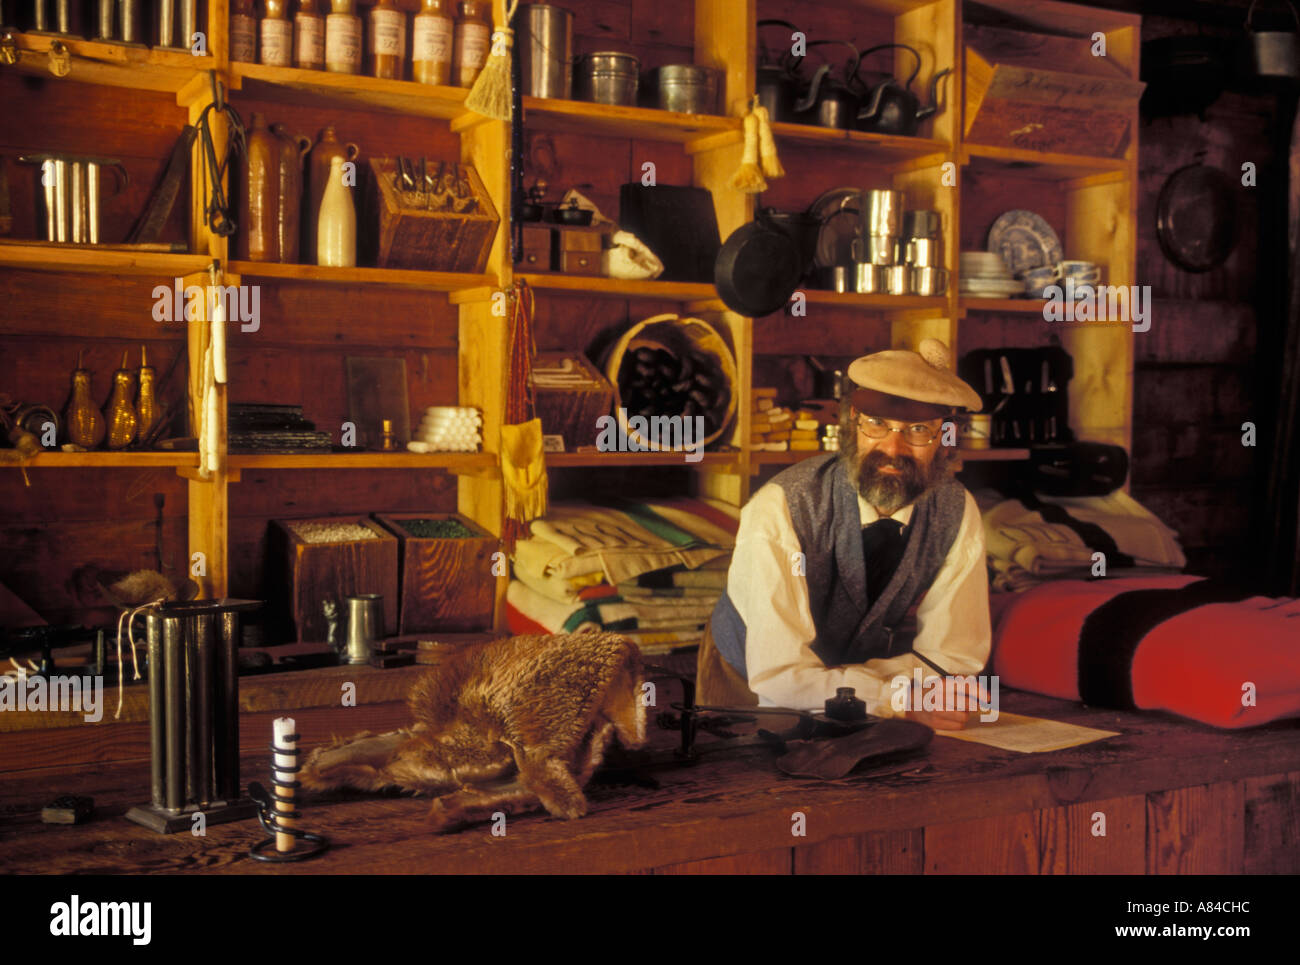 Darryl Hall Historic Interpreter in Trade Store at Fort Nisqually in Point Defiance Park Tacoma Washington Stock Photo